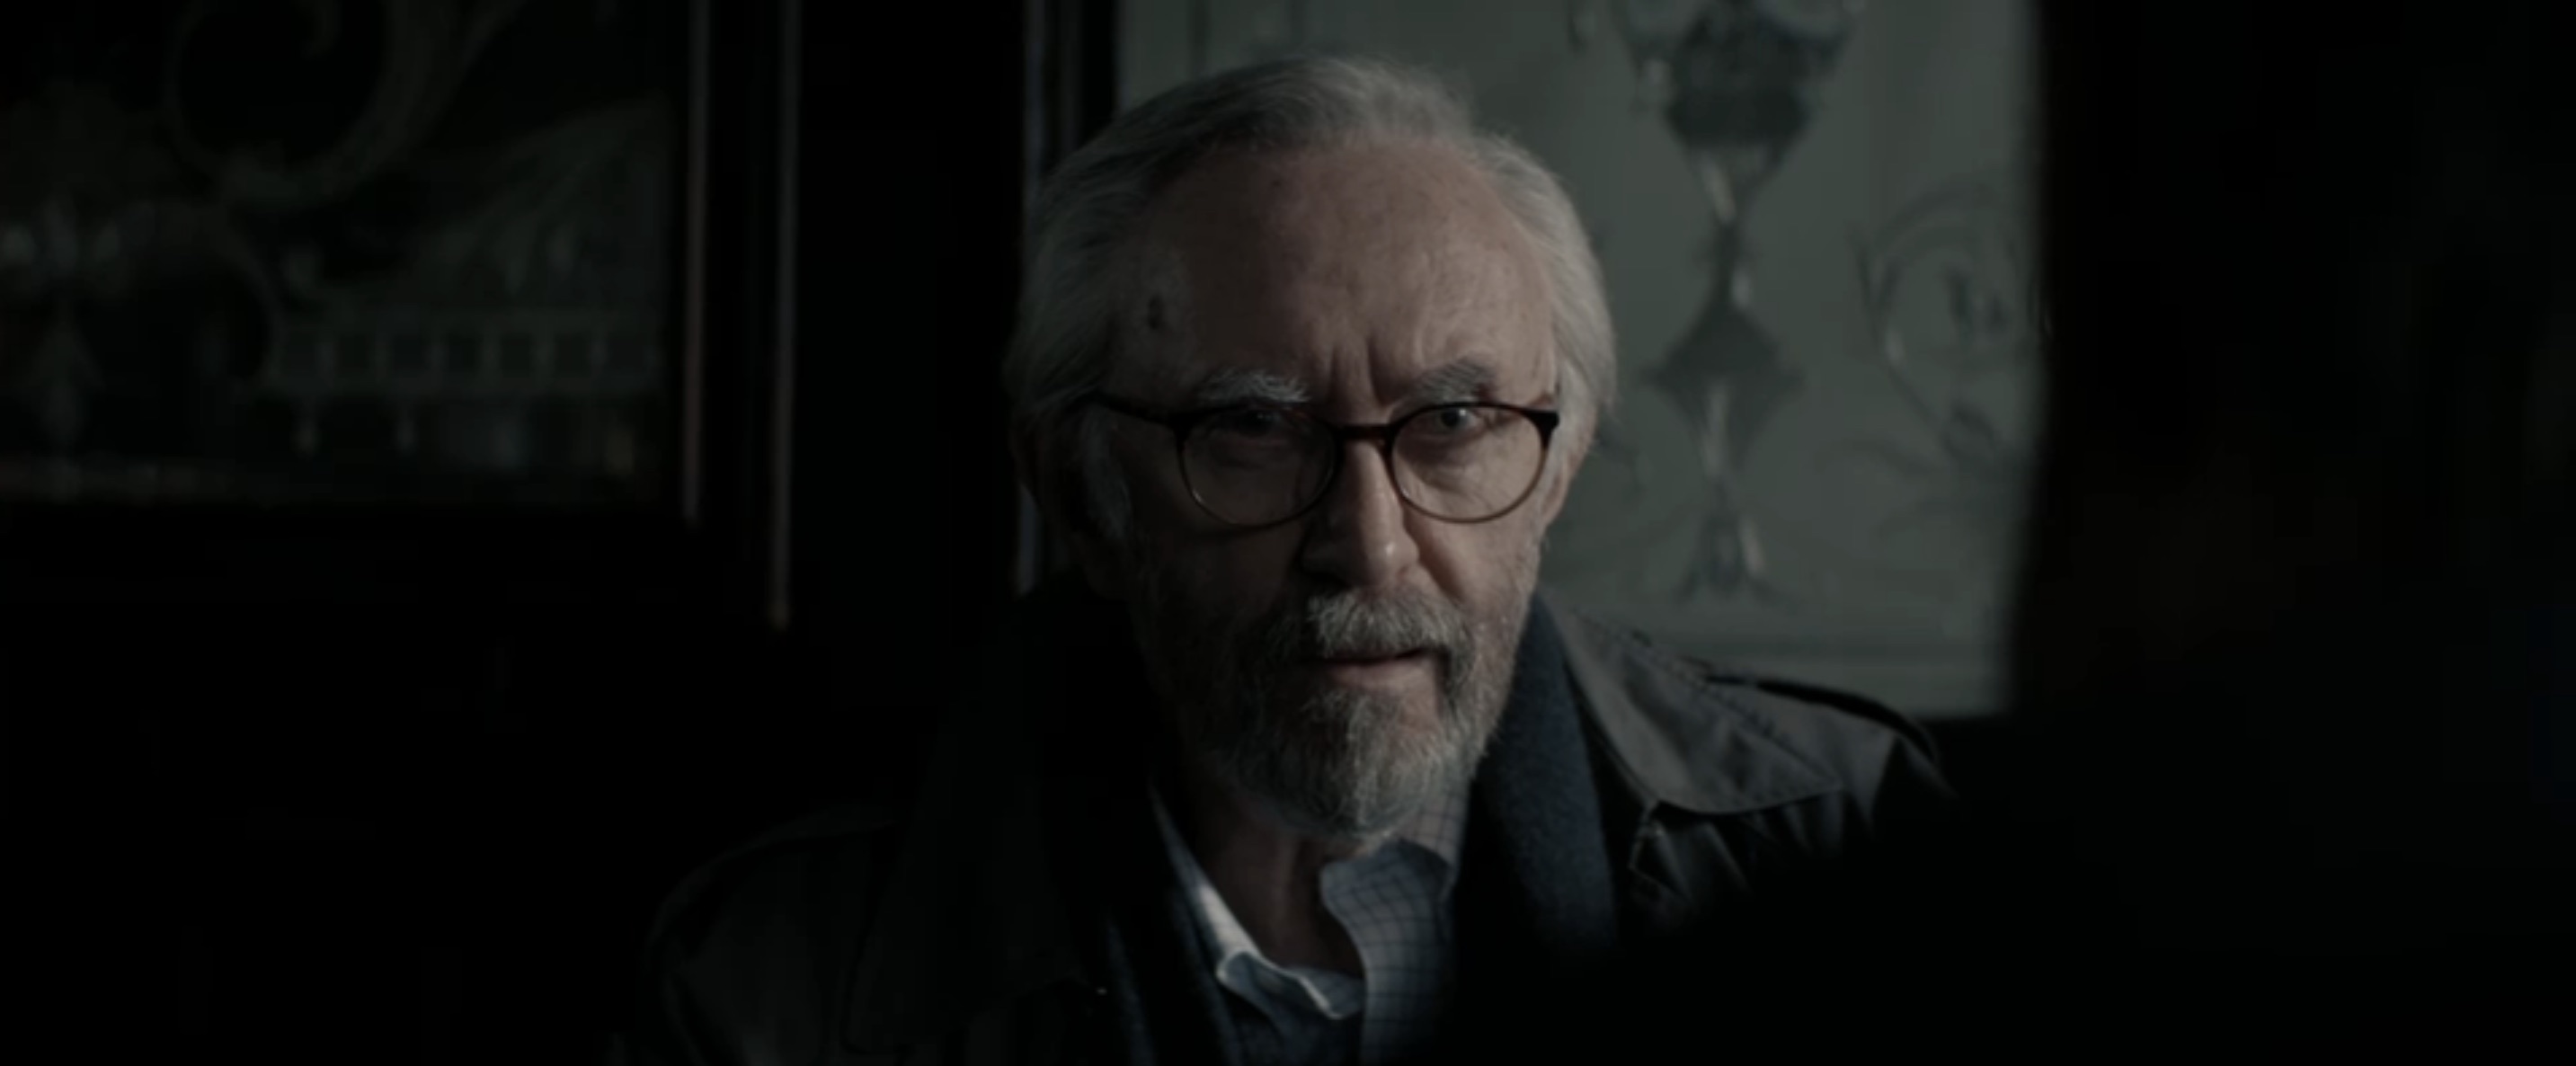 All the Old Knives Cast - Jonathan Pryce as Bill Compton